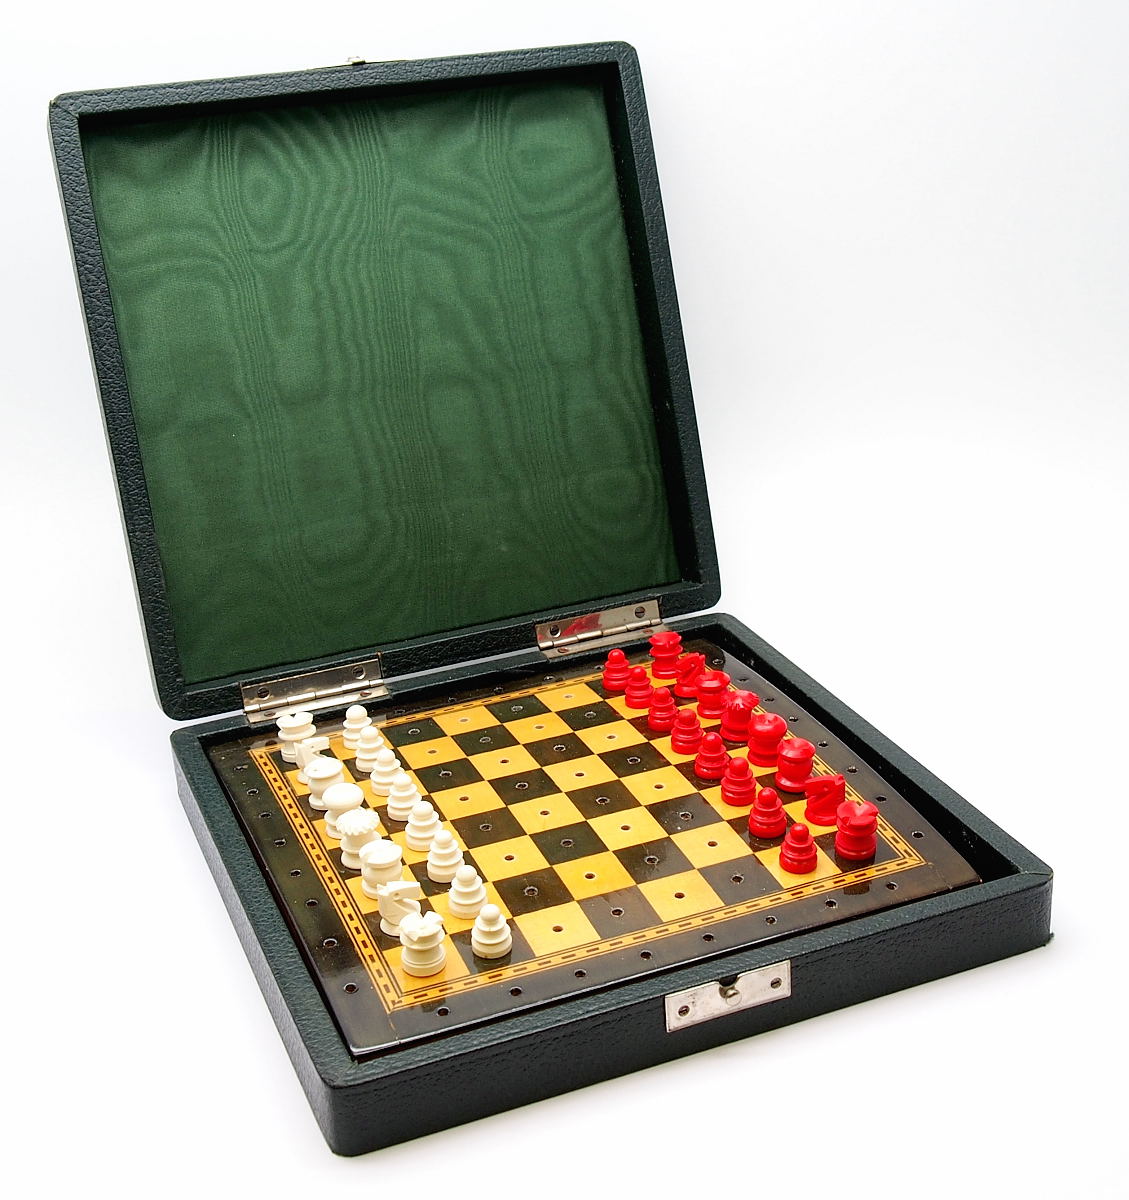 Vintage Pegged Travel Chess Set in Case #9223